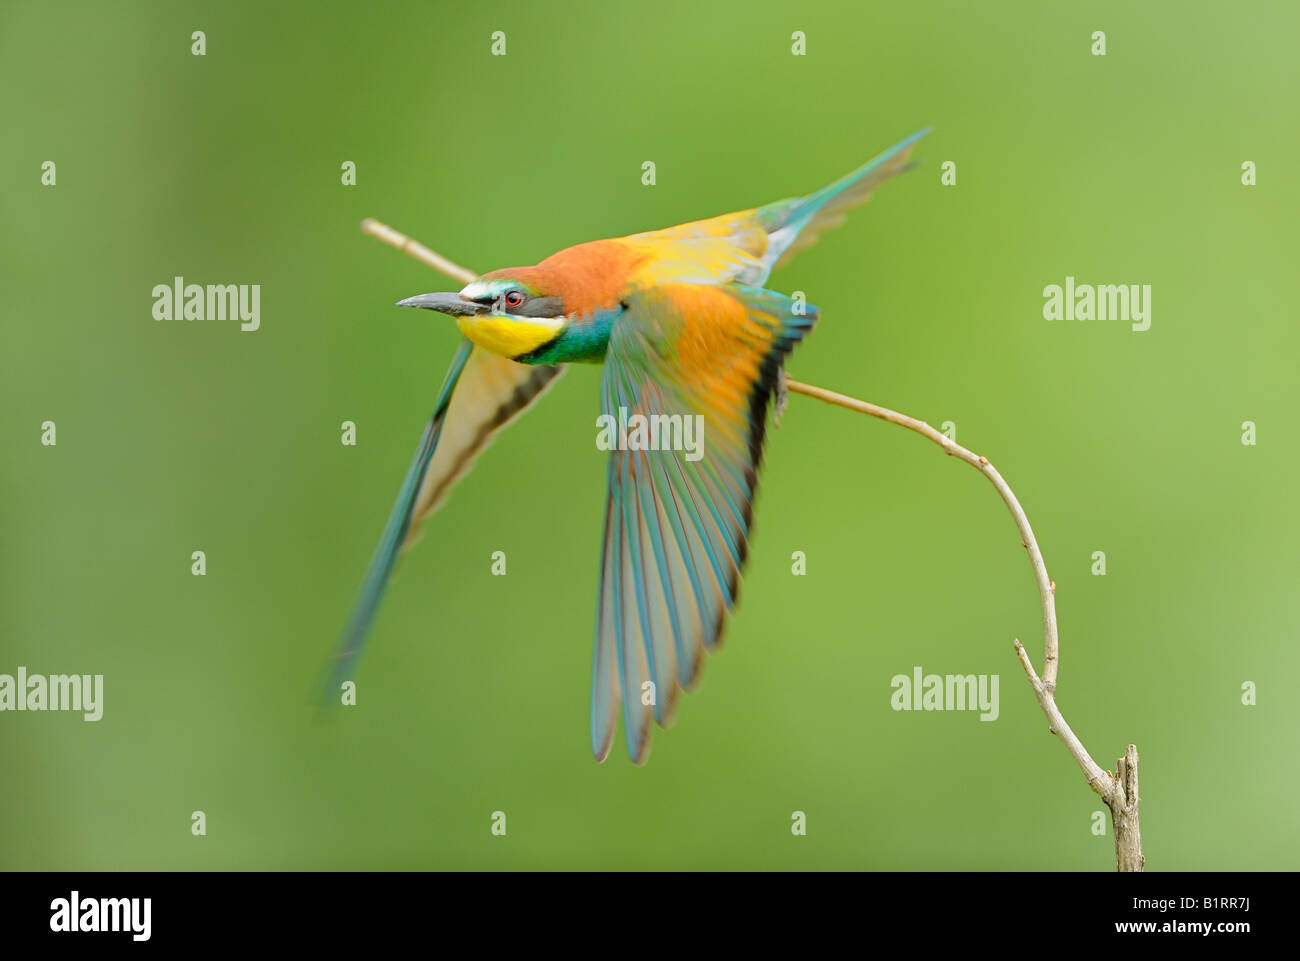 European Bee-eater (Merops apiaster) taking flight from its perch Stock Photo